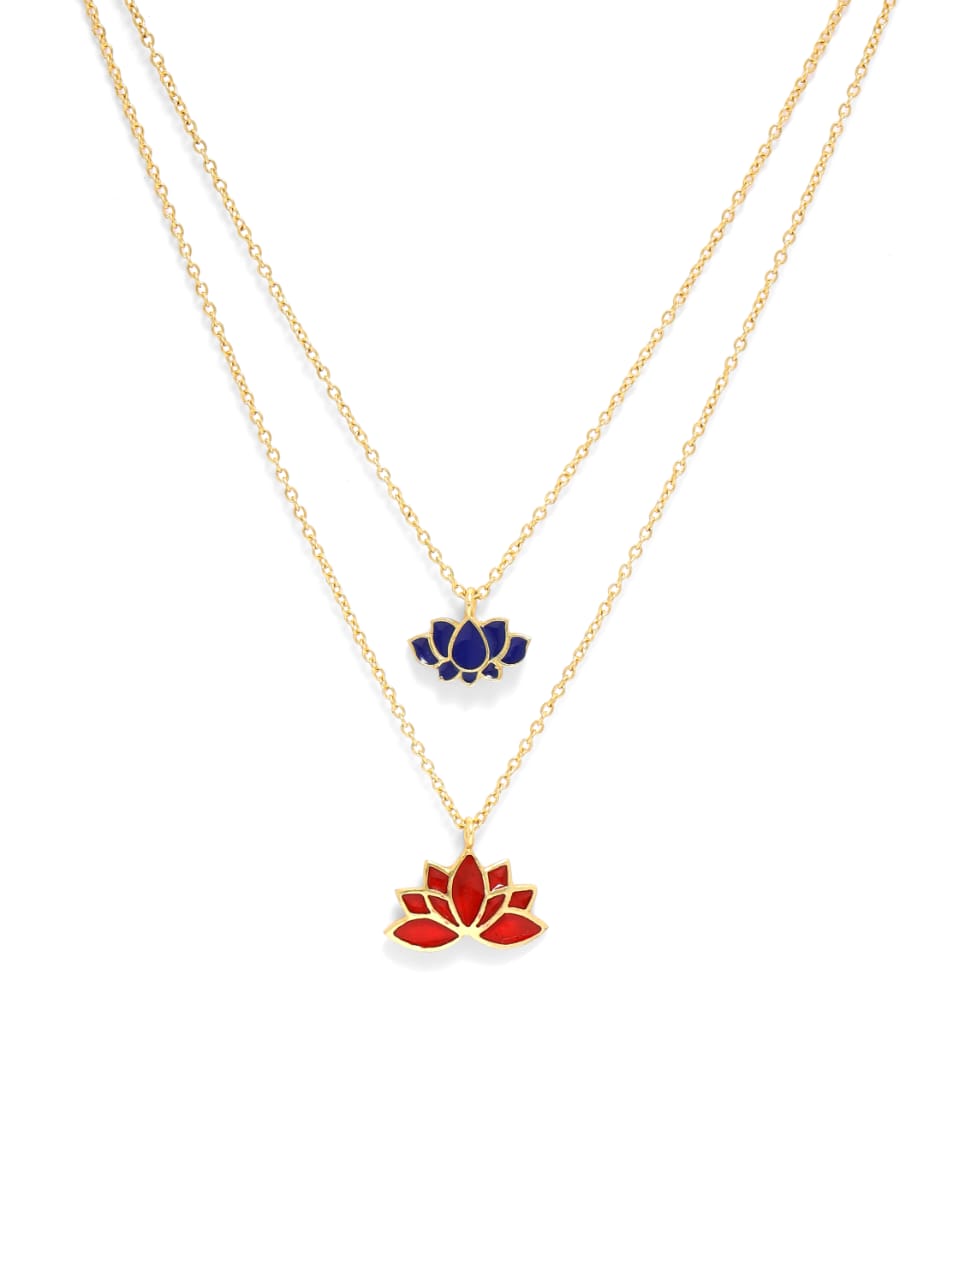 92.5 sterling Silver Gold plated double chain necklace with beautiful touches of enamel.